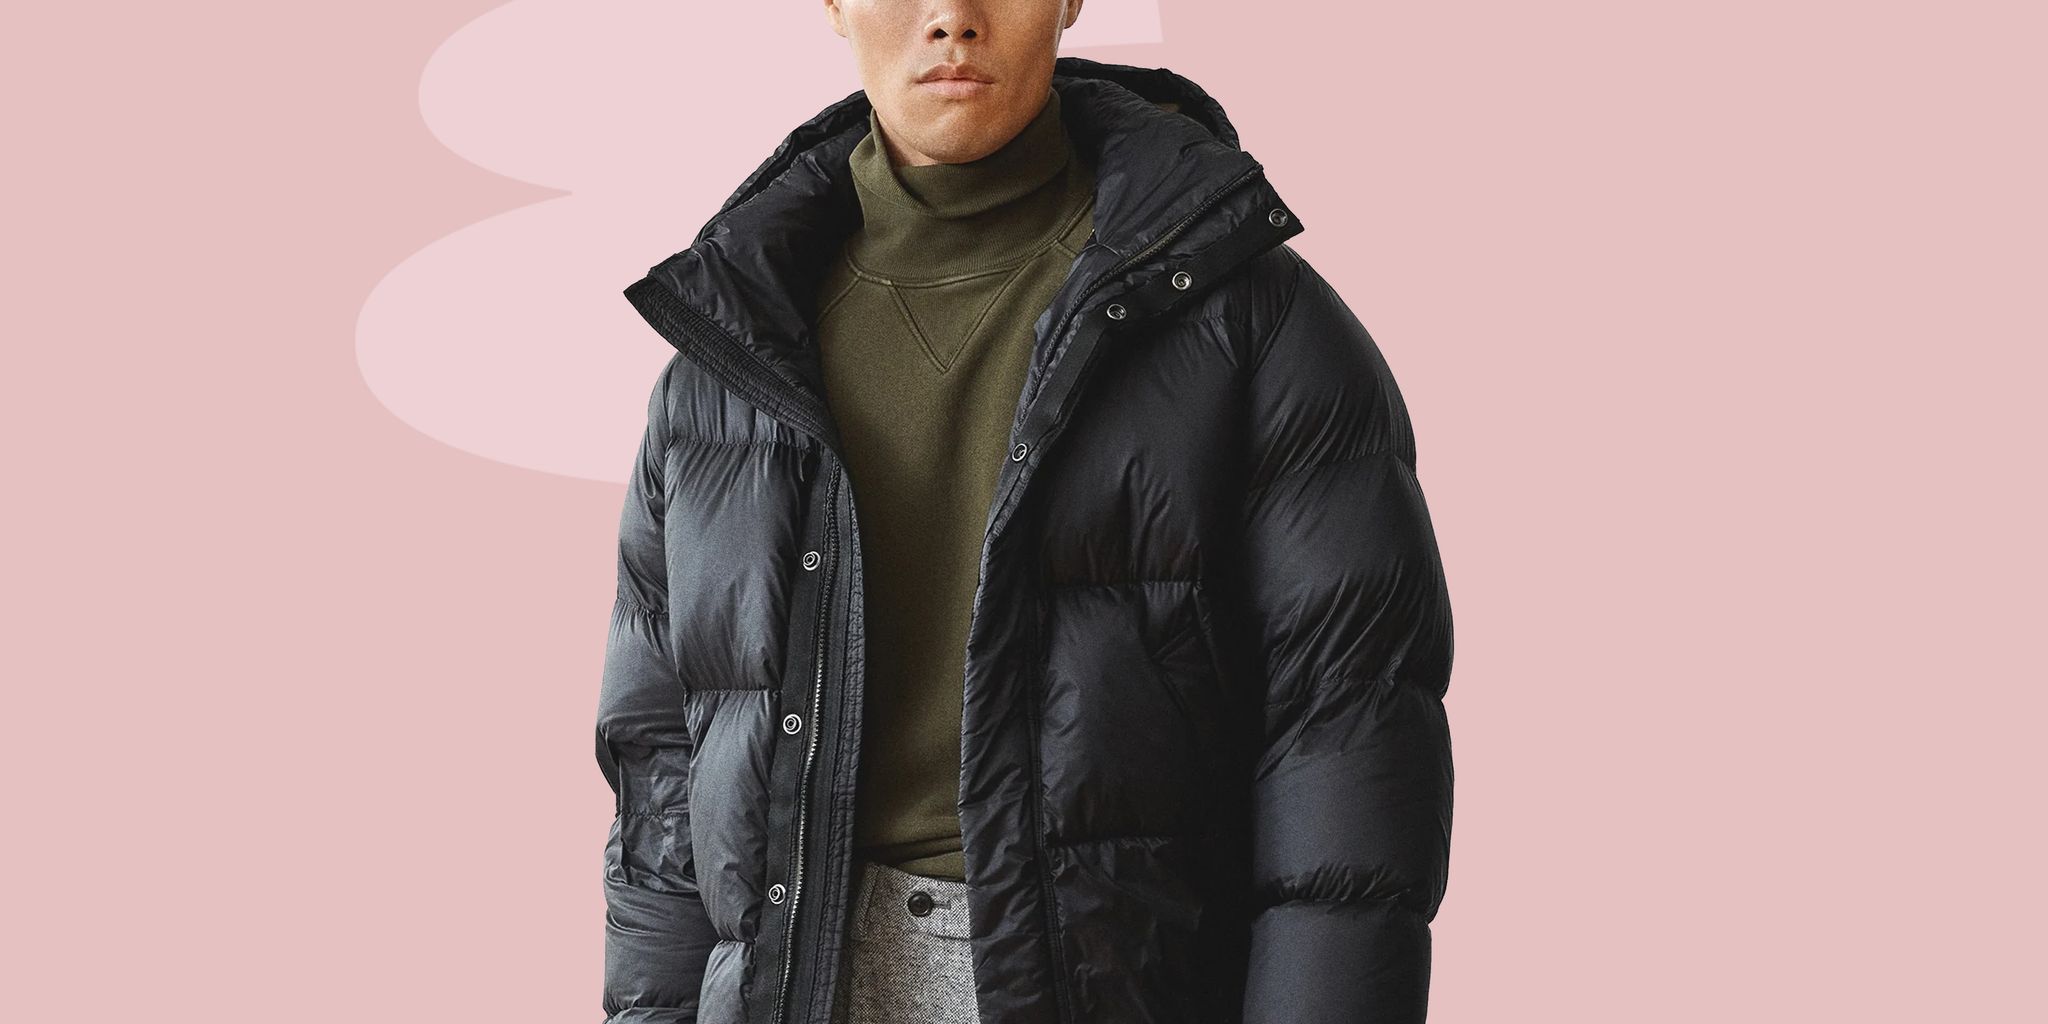 Hoodies vs Jackets: Choosing the Perfect Outerwear